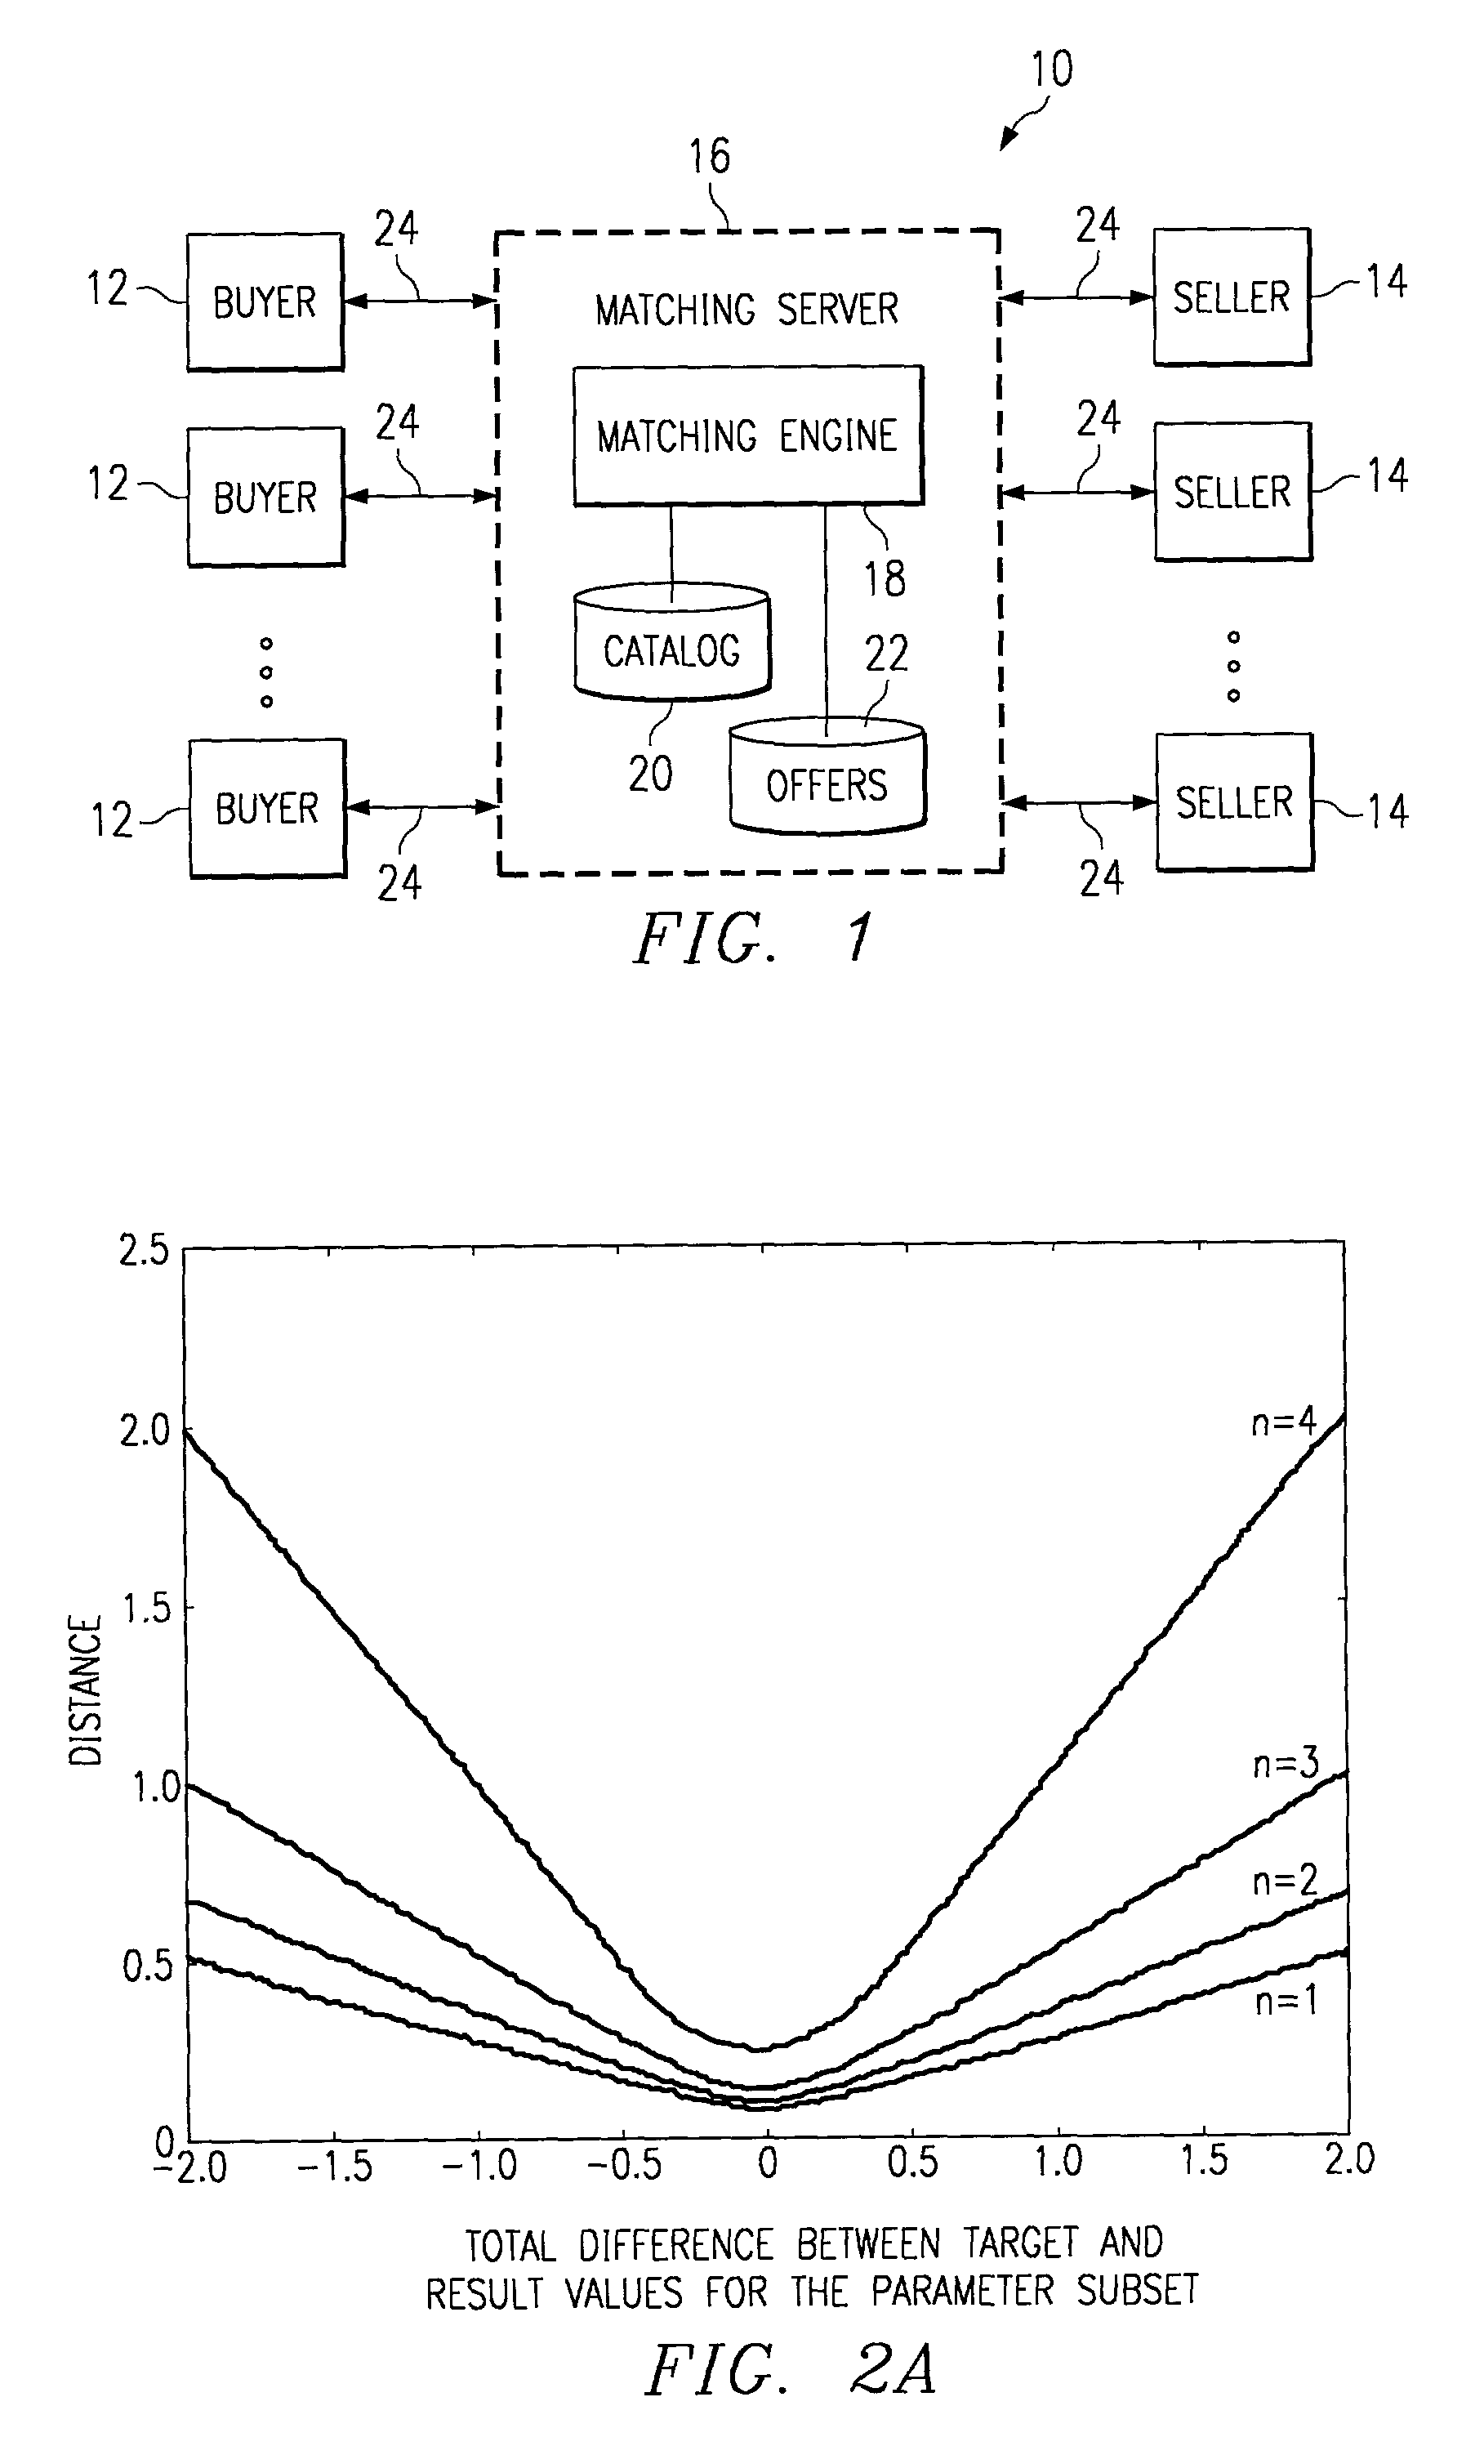 System and method for negotiating according to improved matching criteria